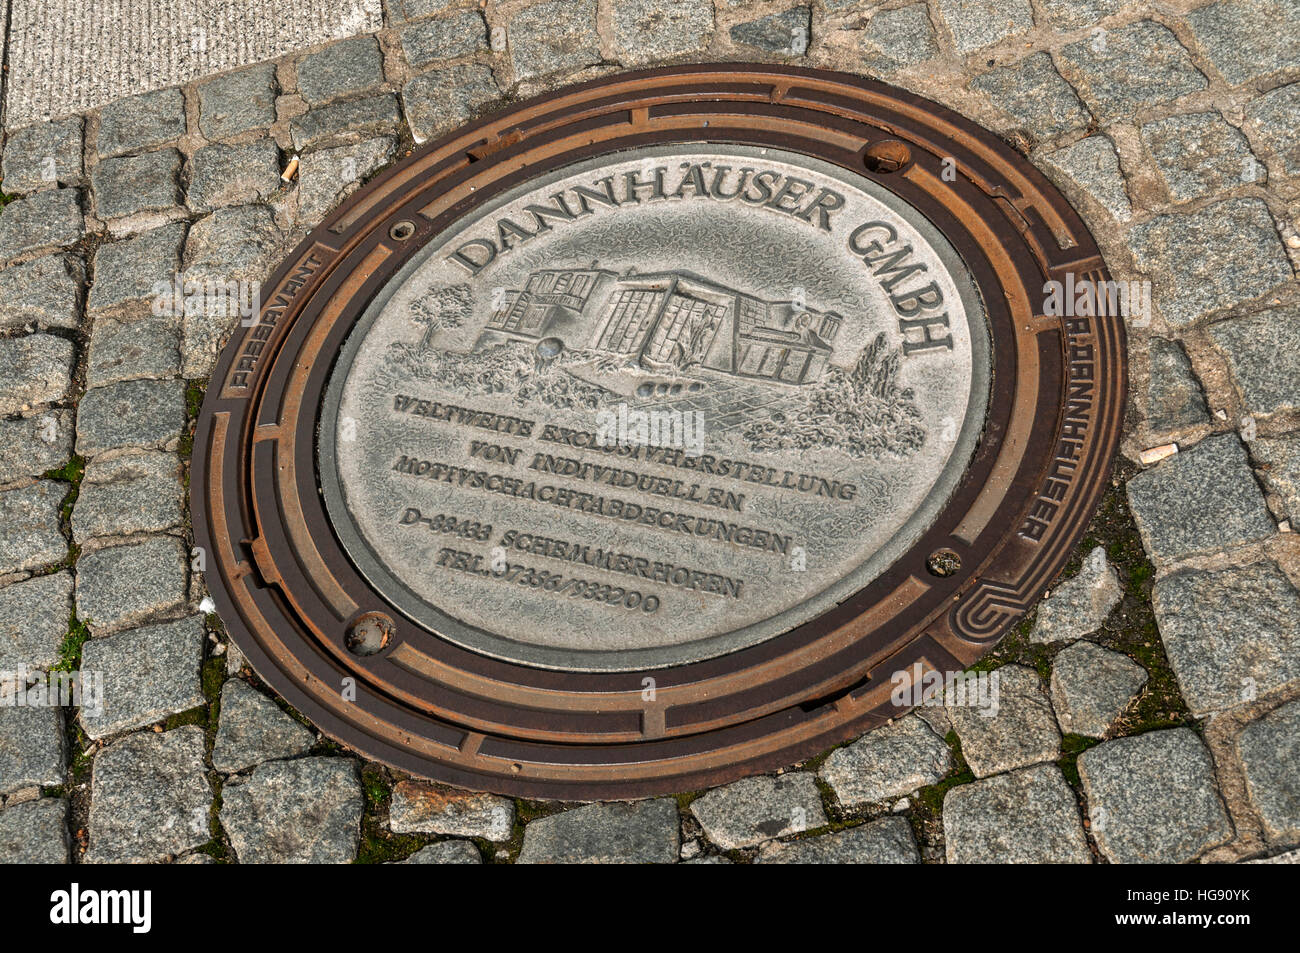 Man-hole cover with self promotion, Germany. Stock Photo